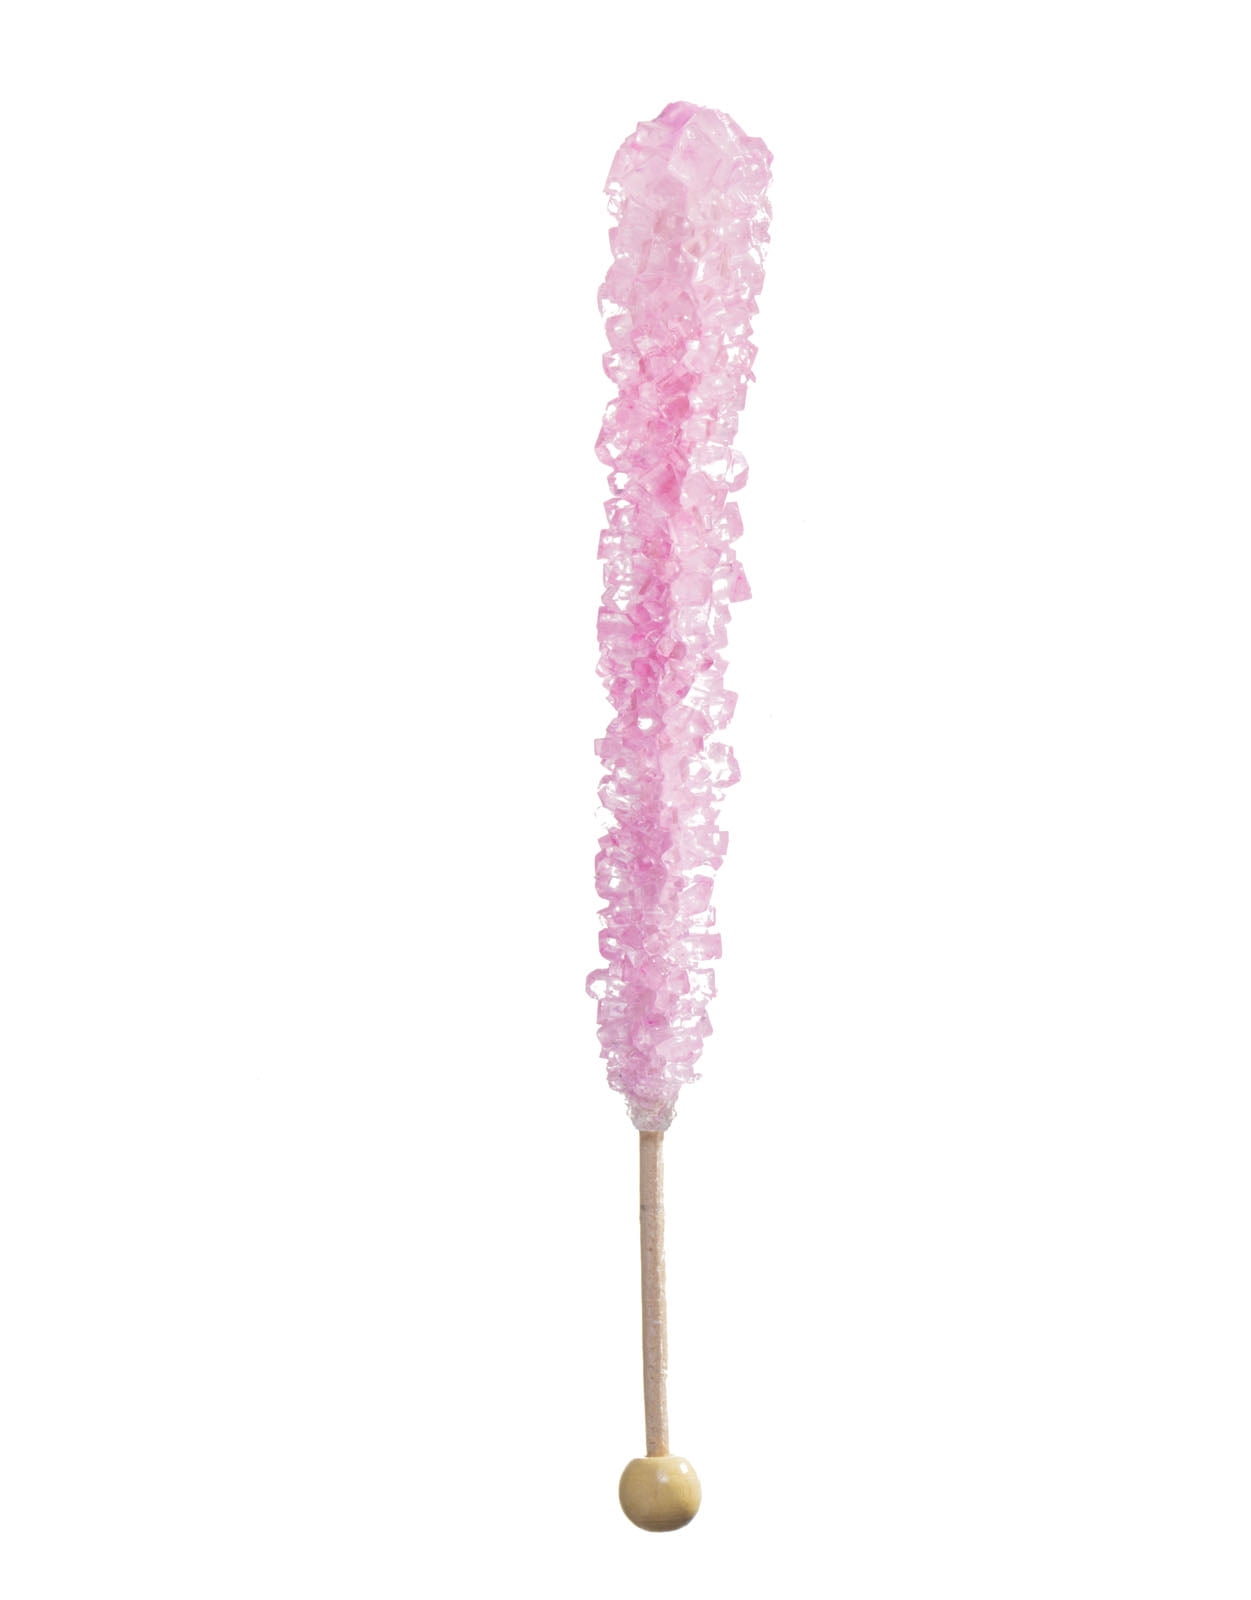 PINK ROCK CANDY CRYSTAL STICKS - 12 PACK - CHERRY FLAVORED ...